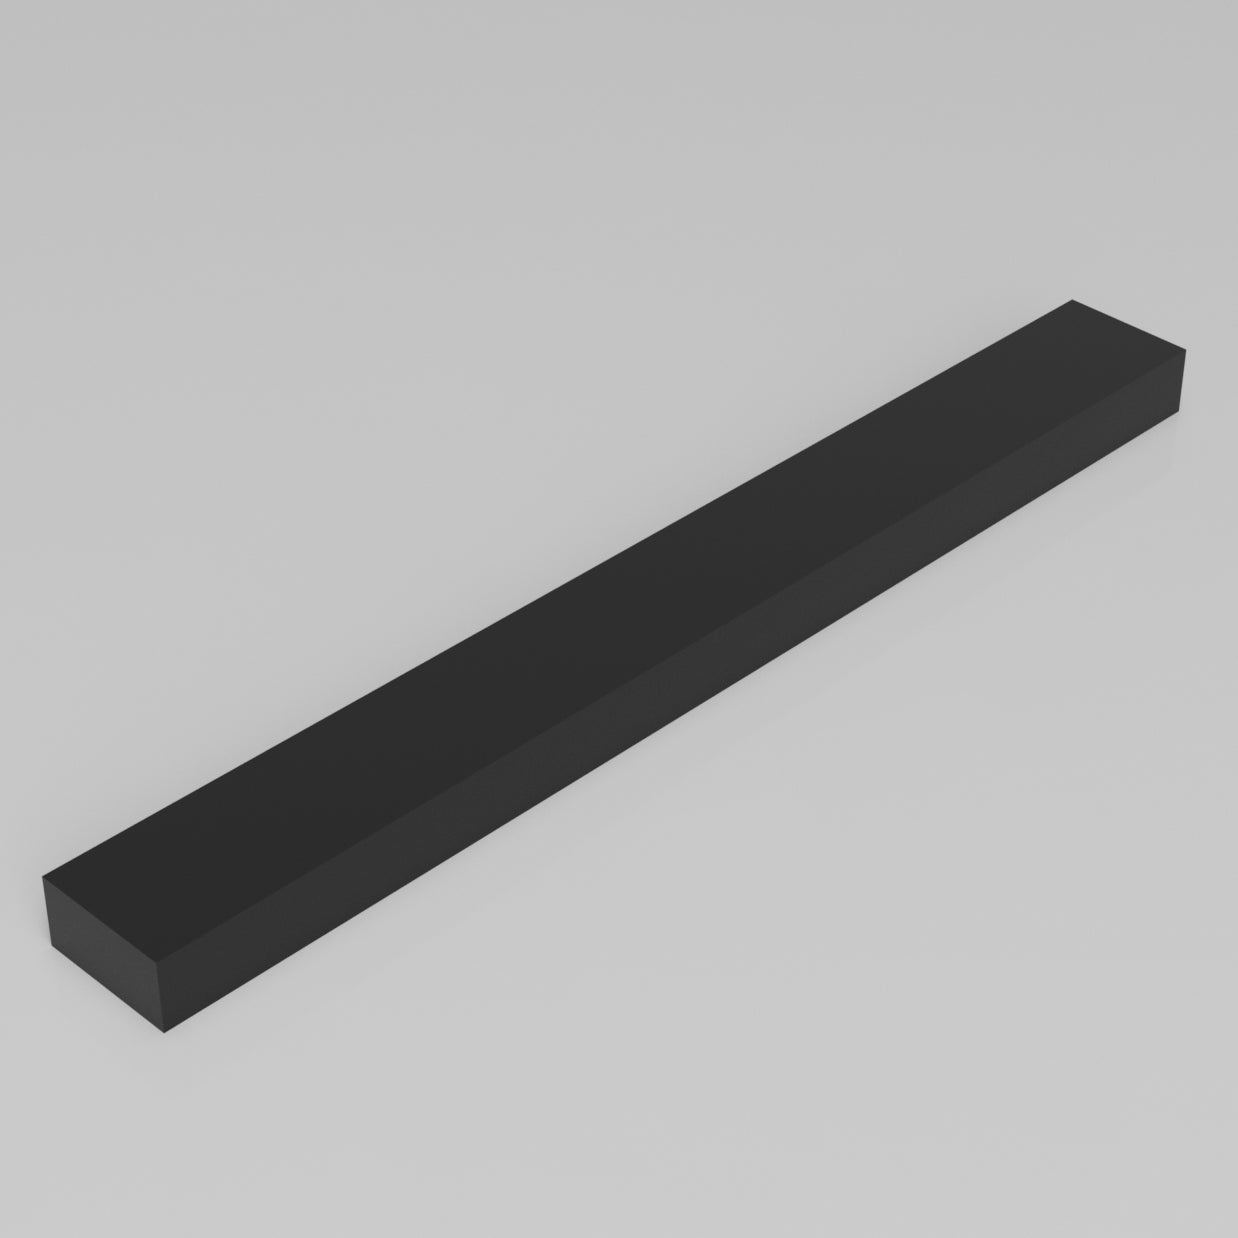 Machinable Wax Rectangular Block Front View 1 Inch by 2 Inch by 18 Inch